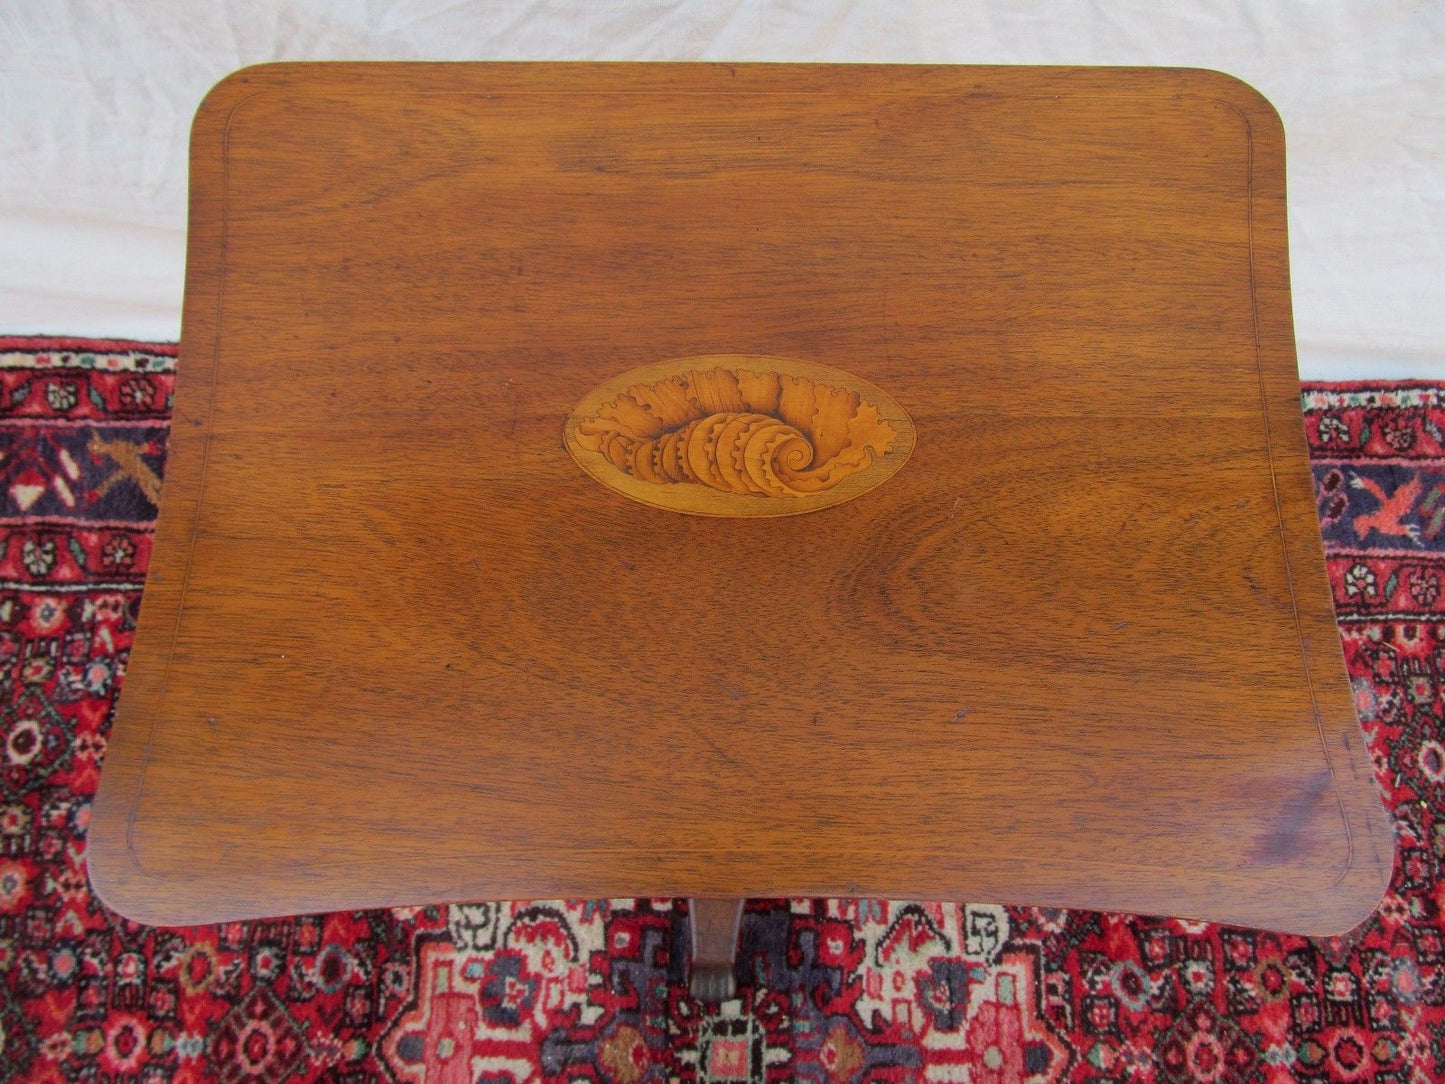 EARLY 19TH CENTURY REGENCY CONCH SHELL INLAID MAHOGANY SEWING TABLE